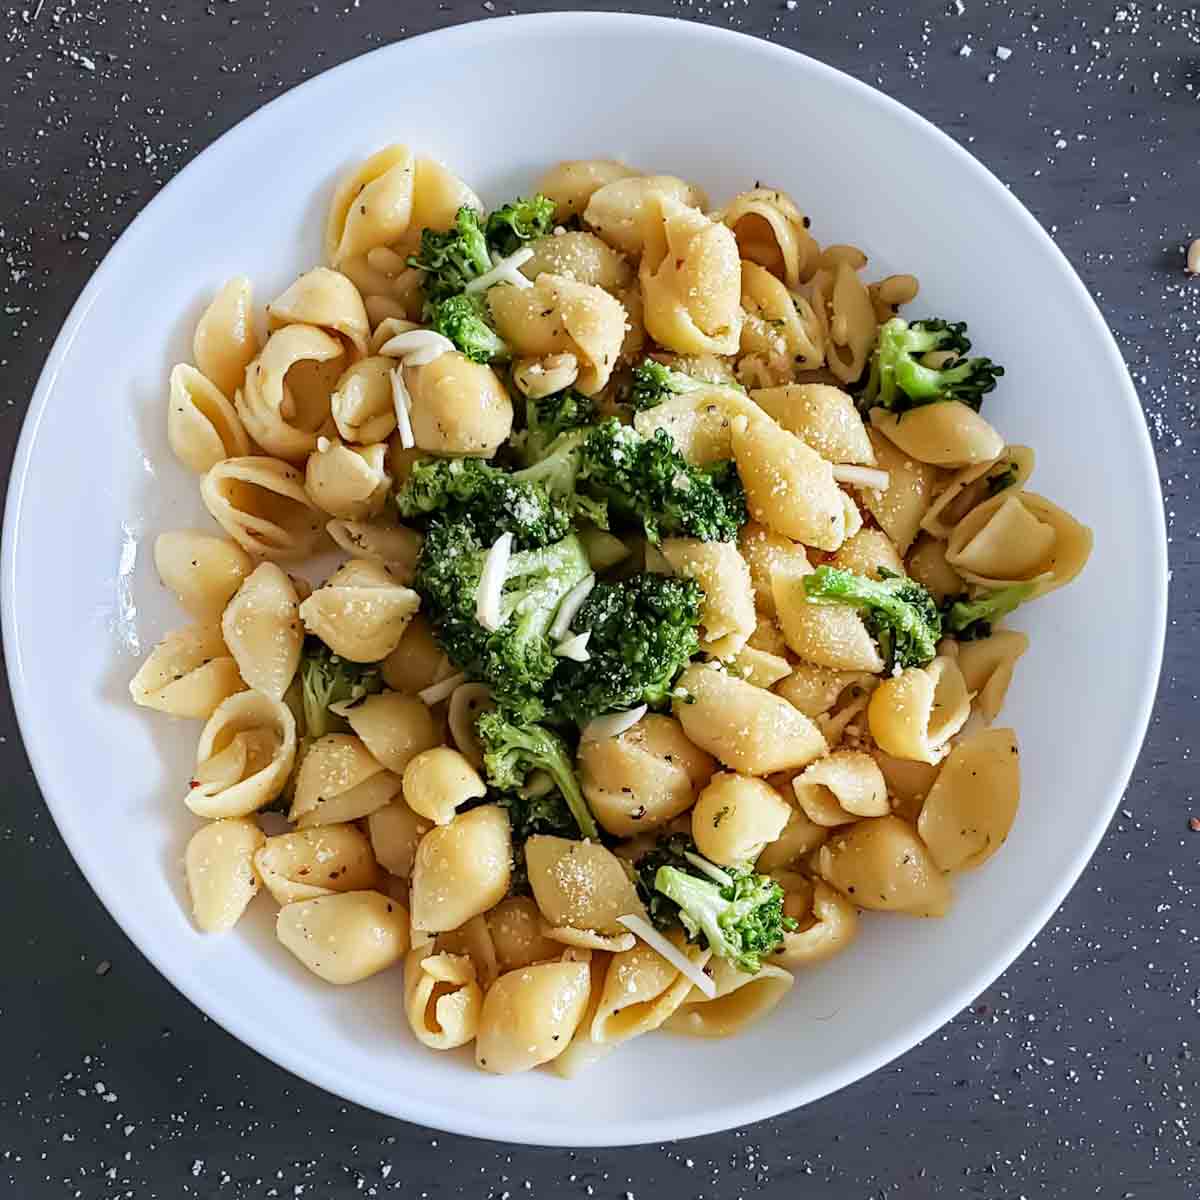 Banza Chickpea pasta with broccoli is served for low carb, high protein meals. This vegan and gluten-free pasta recipe is full of clean eating ingredients.